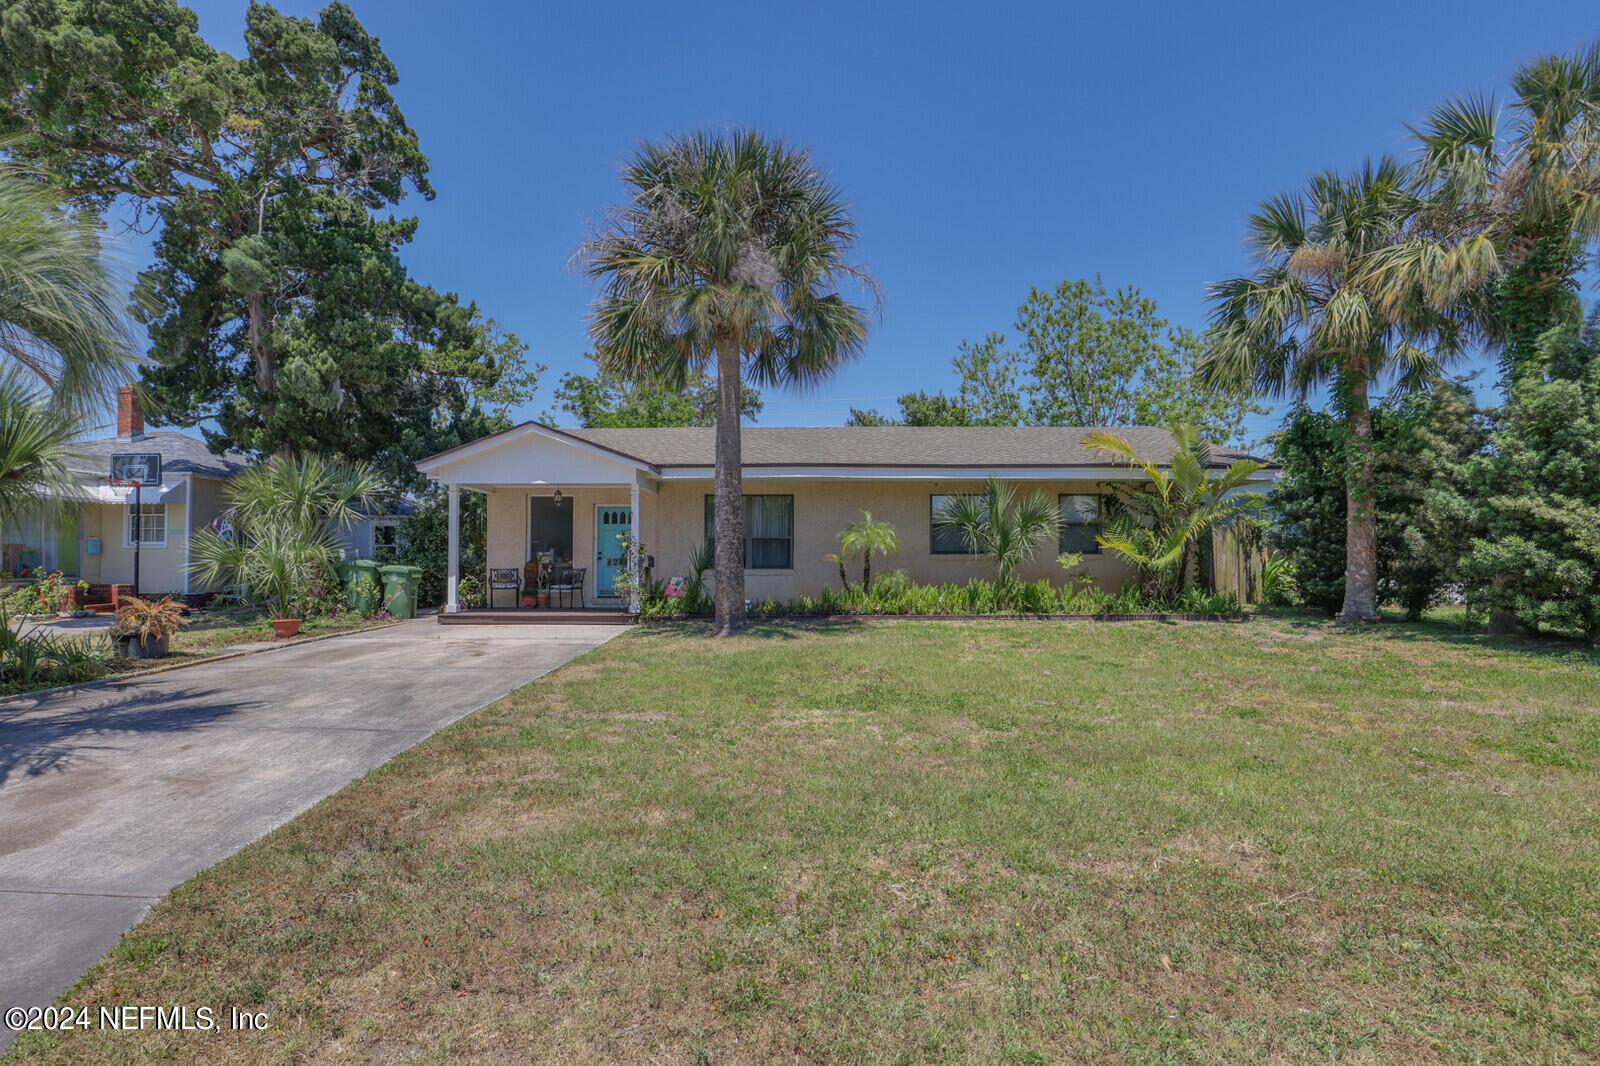 Jacksonville Beach, FL home for sale located at 1205 Palm Circle, Jacksonville Beach, FL 32250